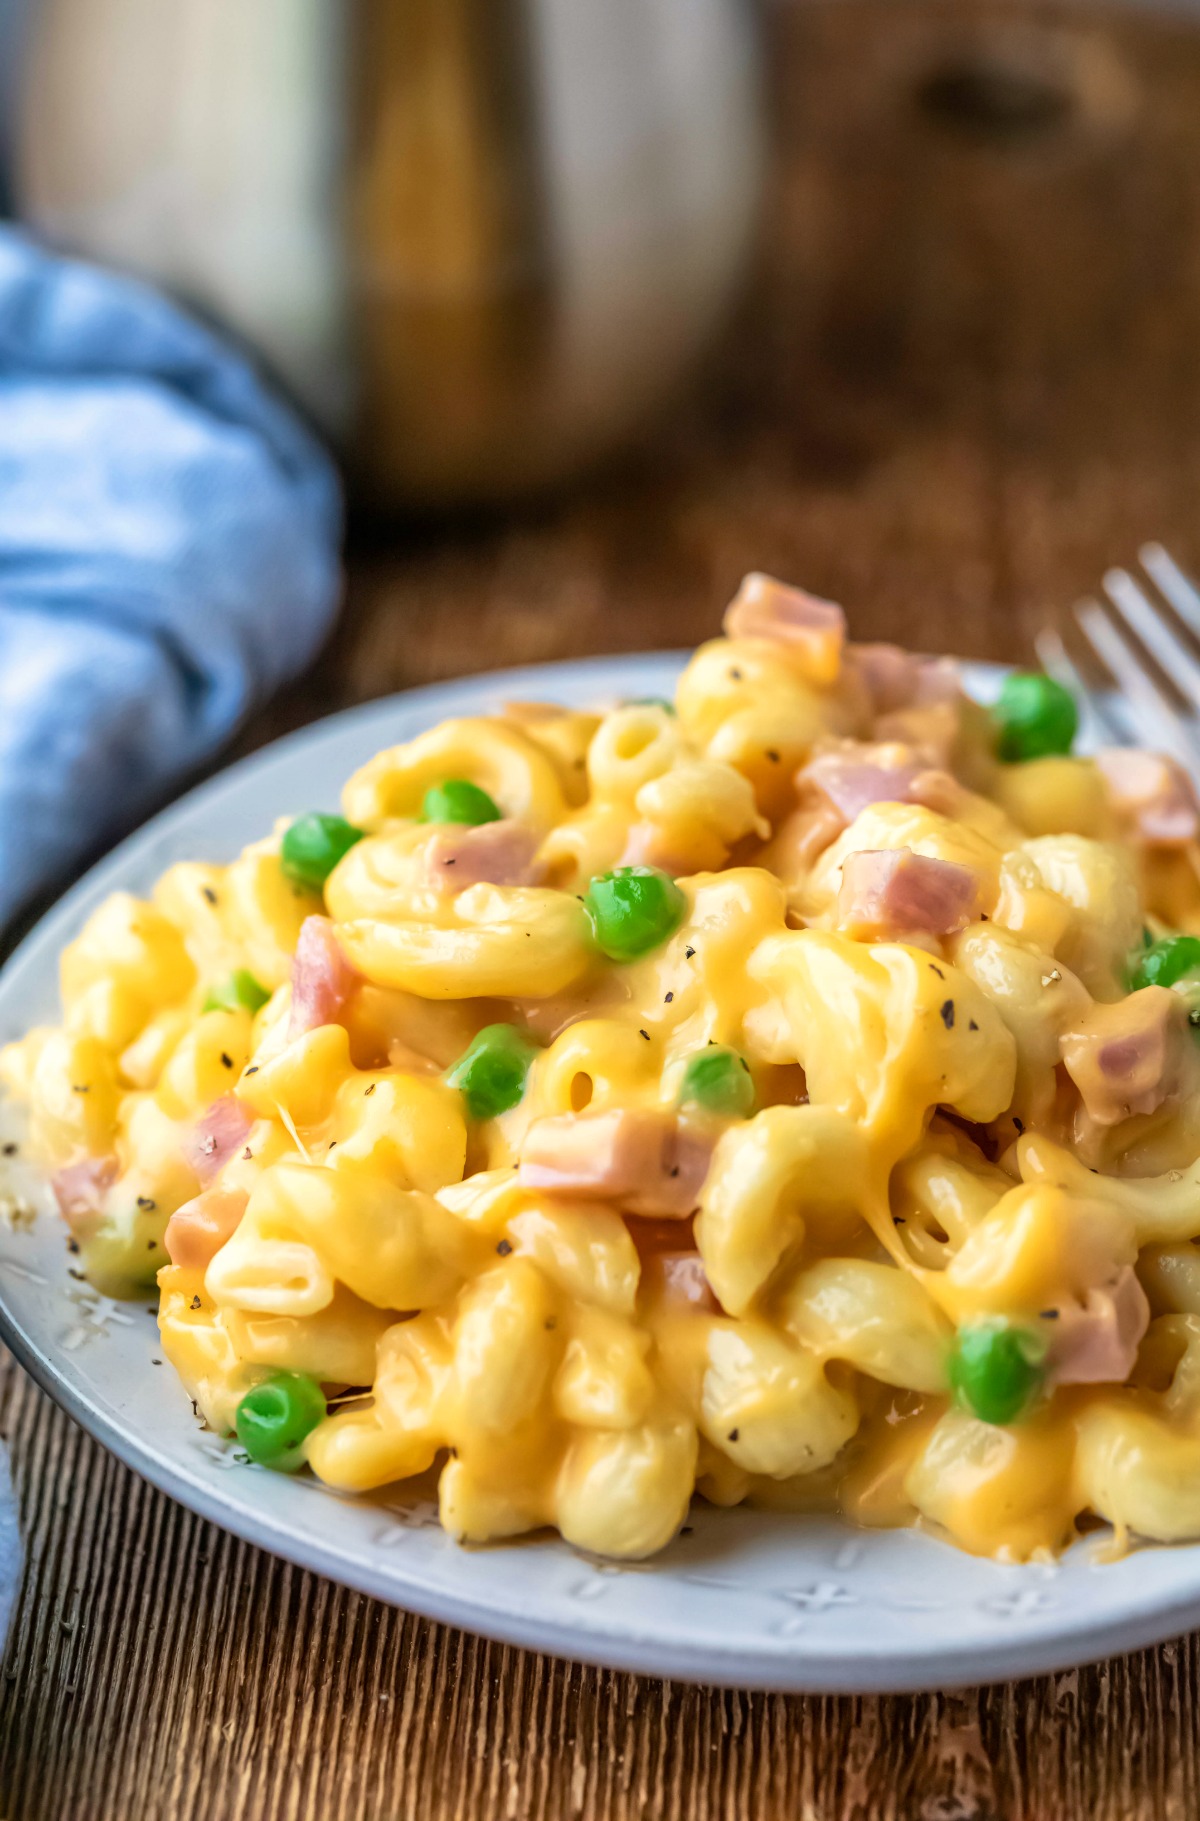 Plate of Instant Pot macaroni and cheese with ham and peas.